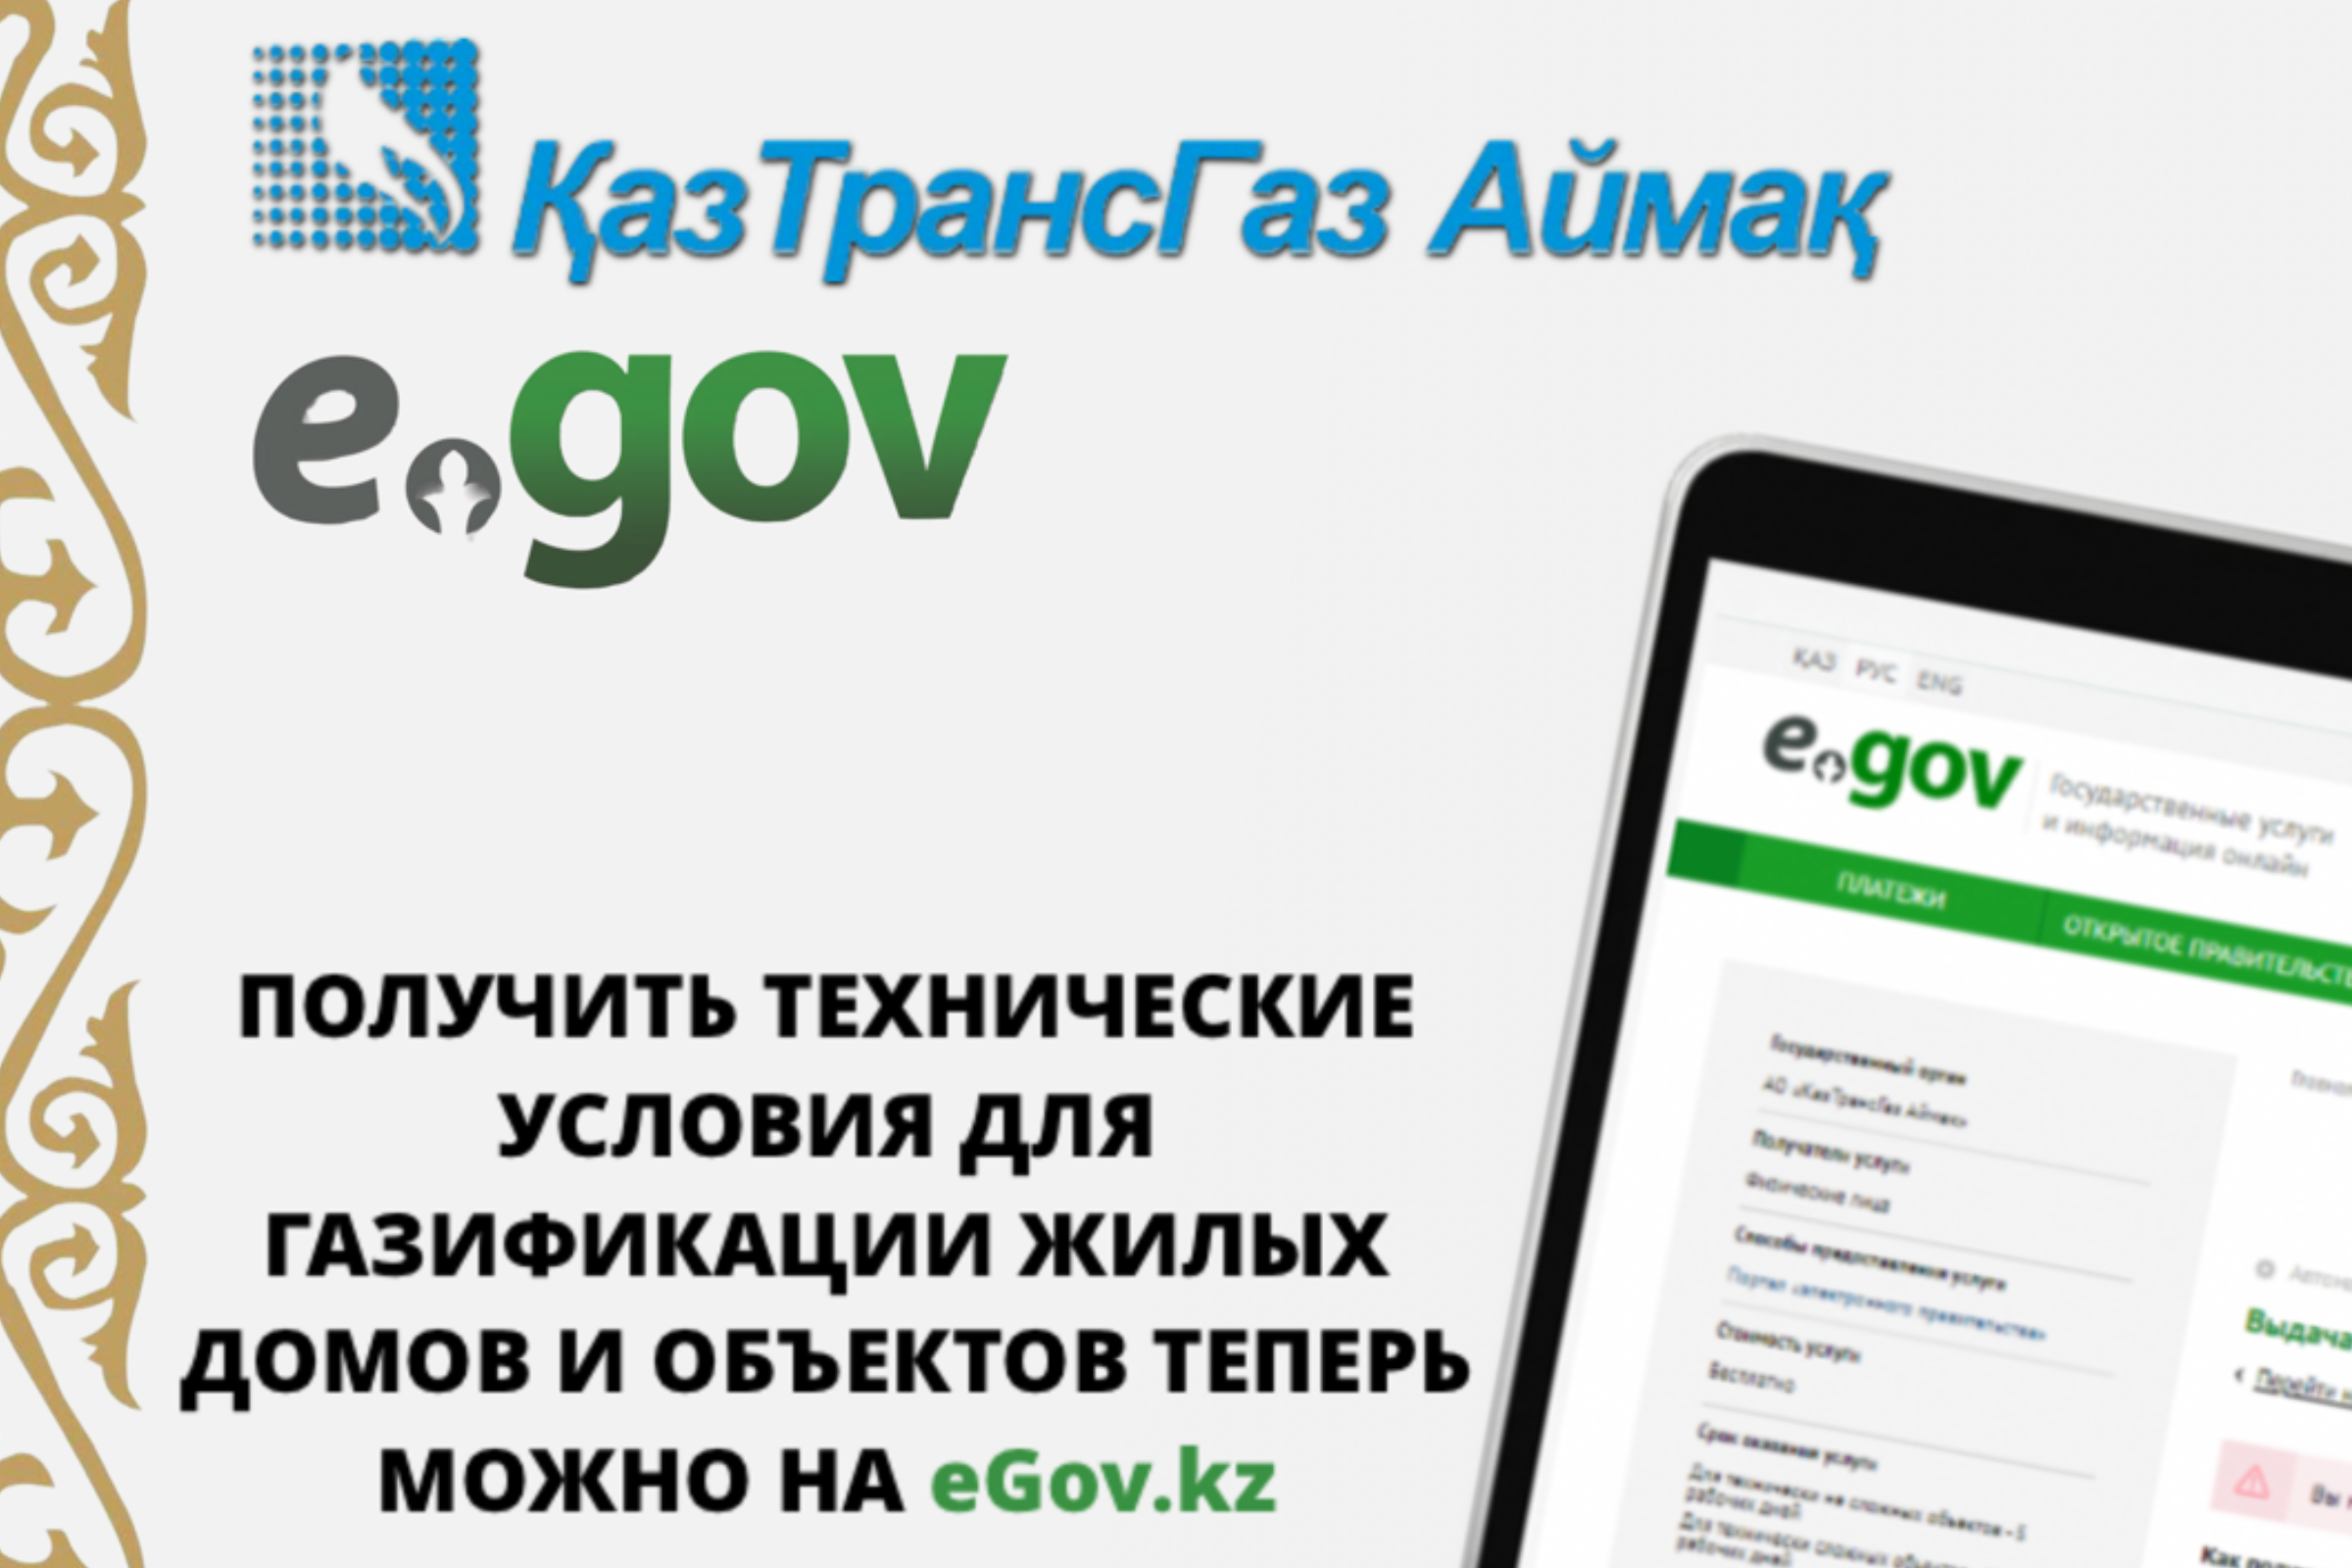 You are currently viewing YOU CAN NOW GET TECHNICAL SPECIFICATIONS FOR GASIFICATION OF RESIDENTIAL BUILDINGS AND FACILITIES ON EGOV.KZ